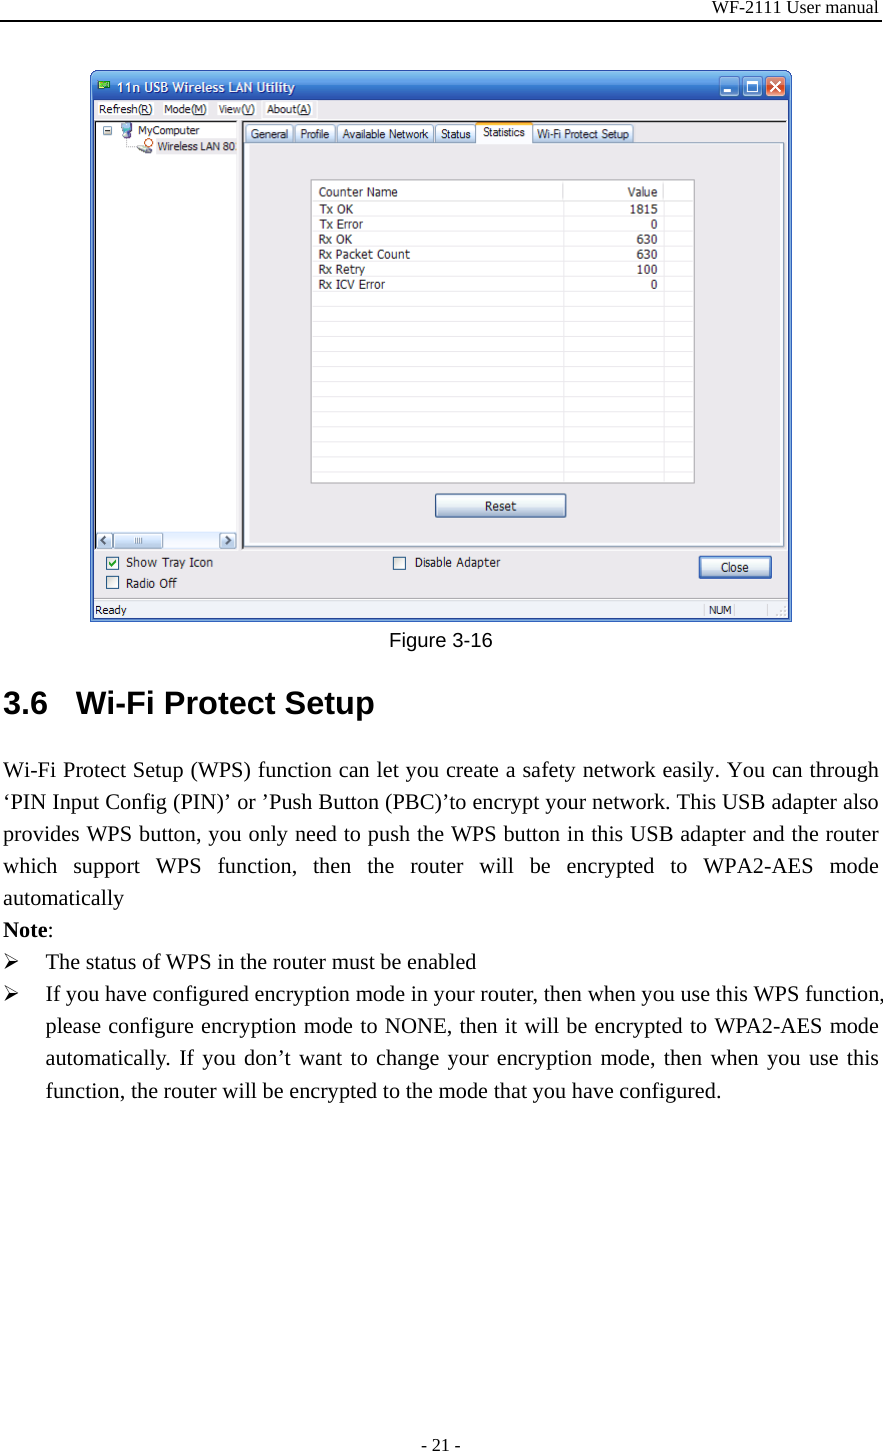 WF-2111 User manual - 21 -  Figure 3-16 3.6  Wi-Fi Protect Setup Wi-Fi Protect Setup (WPS) function can let you create a safety network easily. You can through ‘PIN Input Config (PIN)’ or ’Push Button (PBC)’to encrypt your network. This USB adapter also provides WPS button, you only need to push the WPS button in this USB adapter and the router which support WPS function, then the router will be encrypted to WPA2-AES mode automatically Note: ¾ The status of WPS in the router must be enabled ¾ If you have configured encryption mode in your router, then when you use this WPS function, please configure encryption mode to NONE, then it will be encrypted to WPA2-AES mode automatically. If you don’t want to change your encryption mode, then when you use this function, the router will be encrypted to the mode that you have configured. 